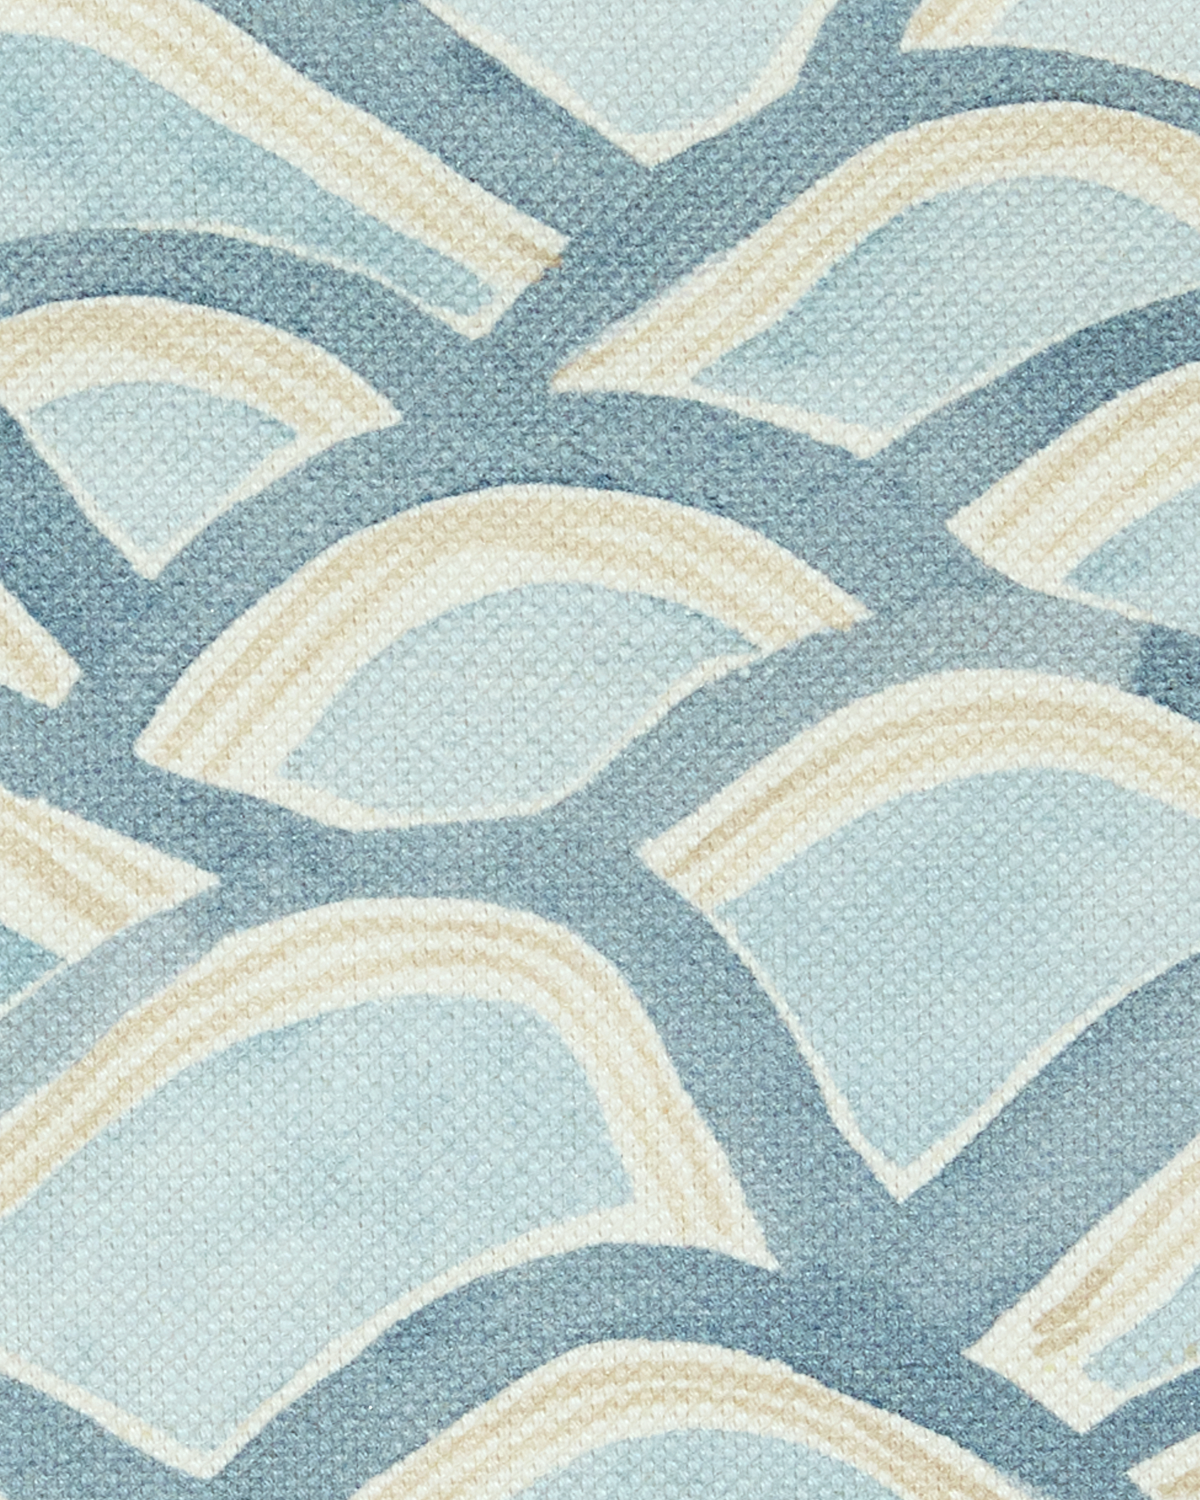 Mountains Fabric in Light Blue